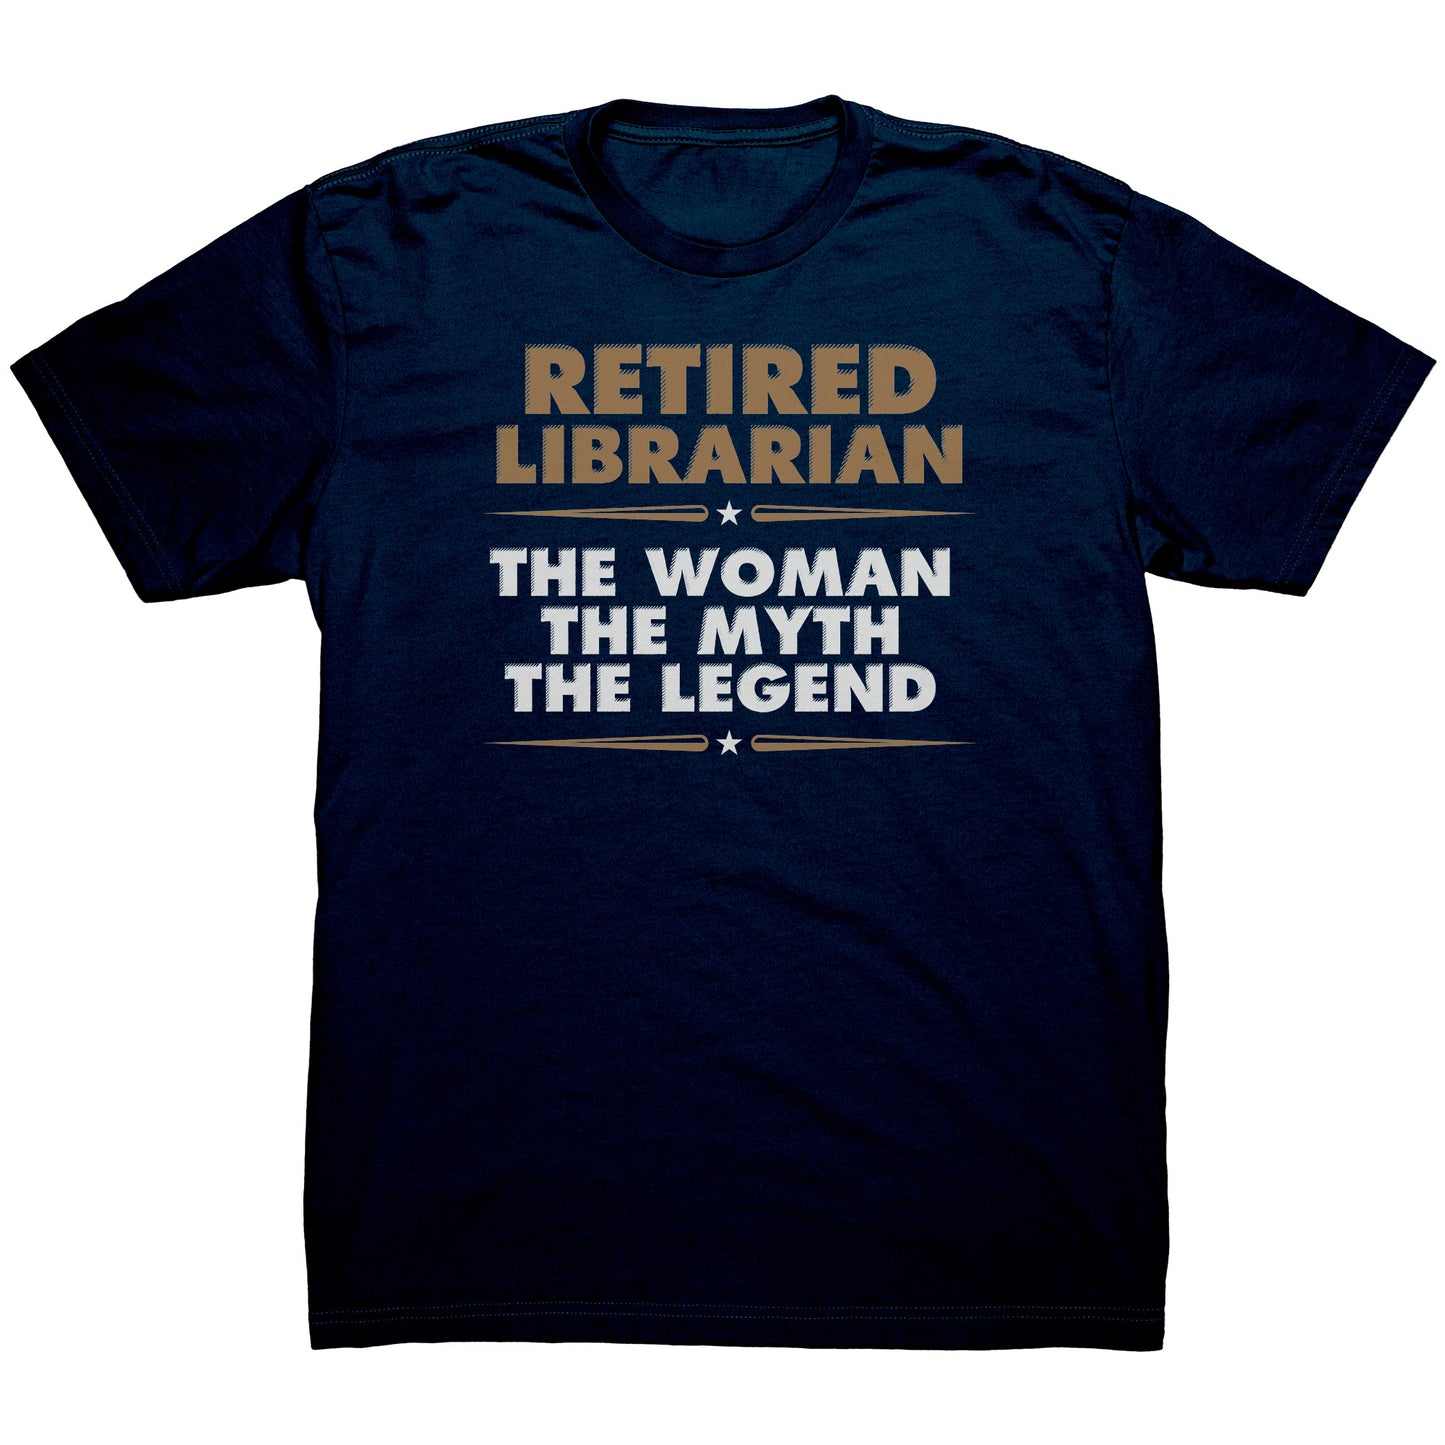 Retired Librarian. The Woman The Myth The Legend | Men's T-Shirt